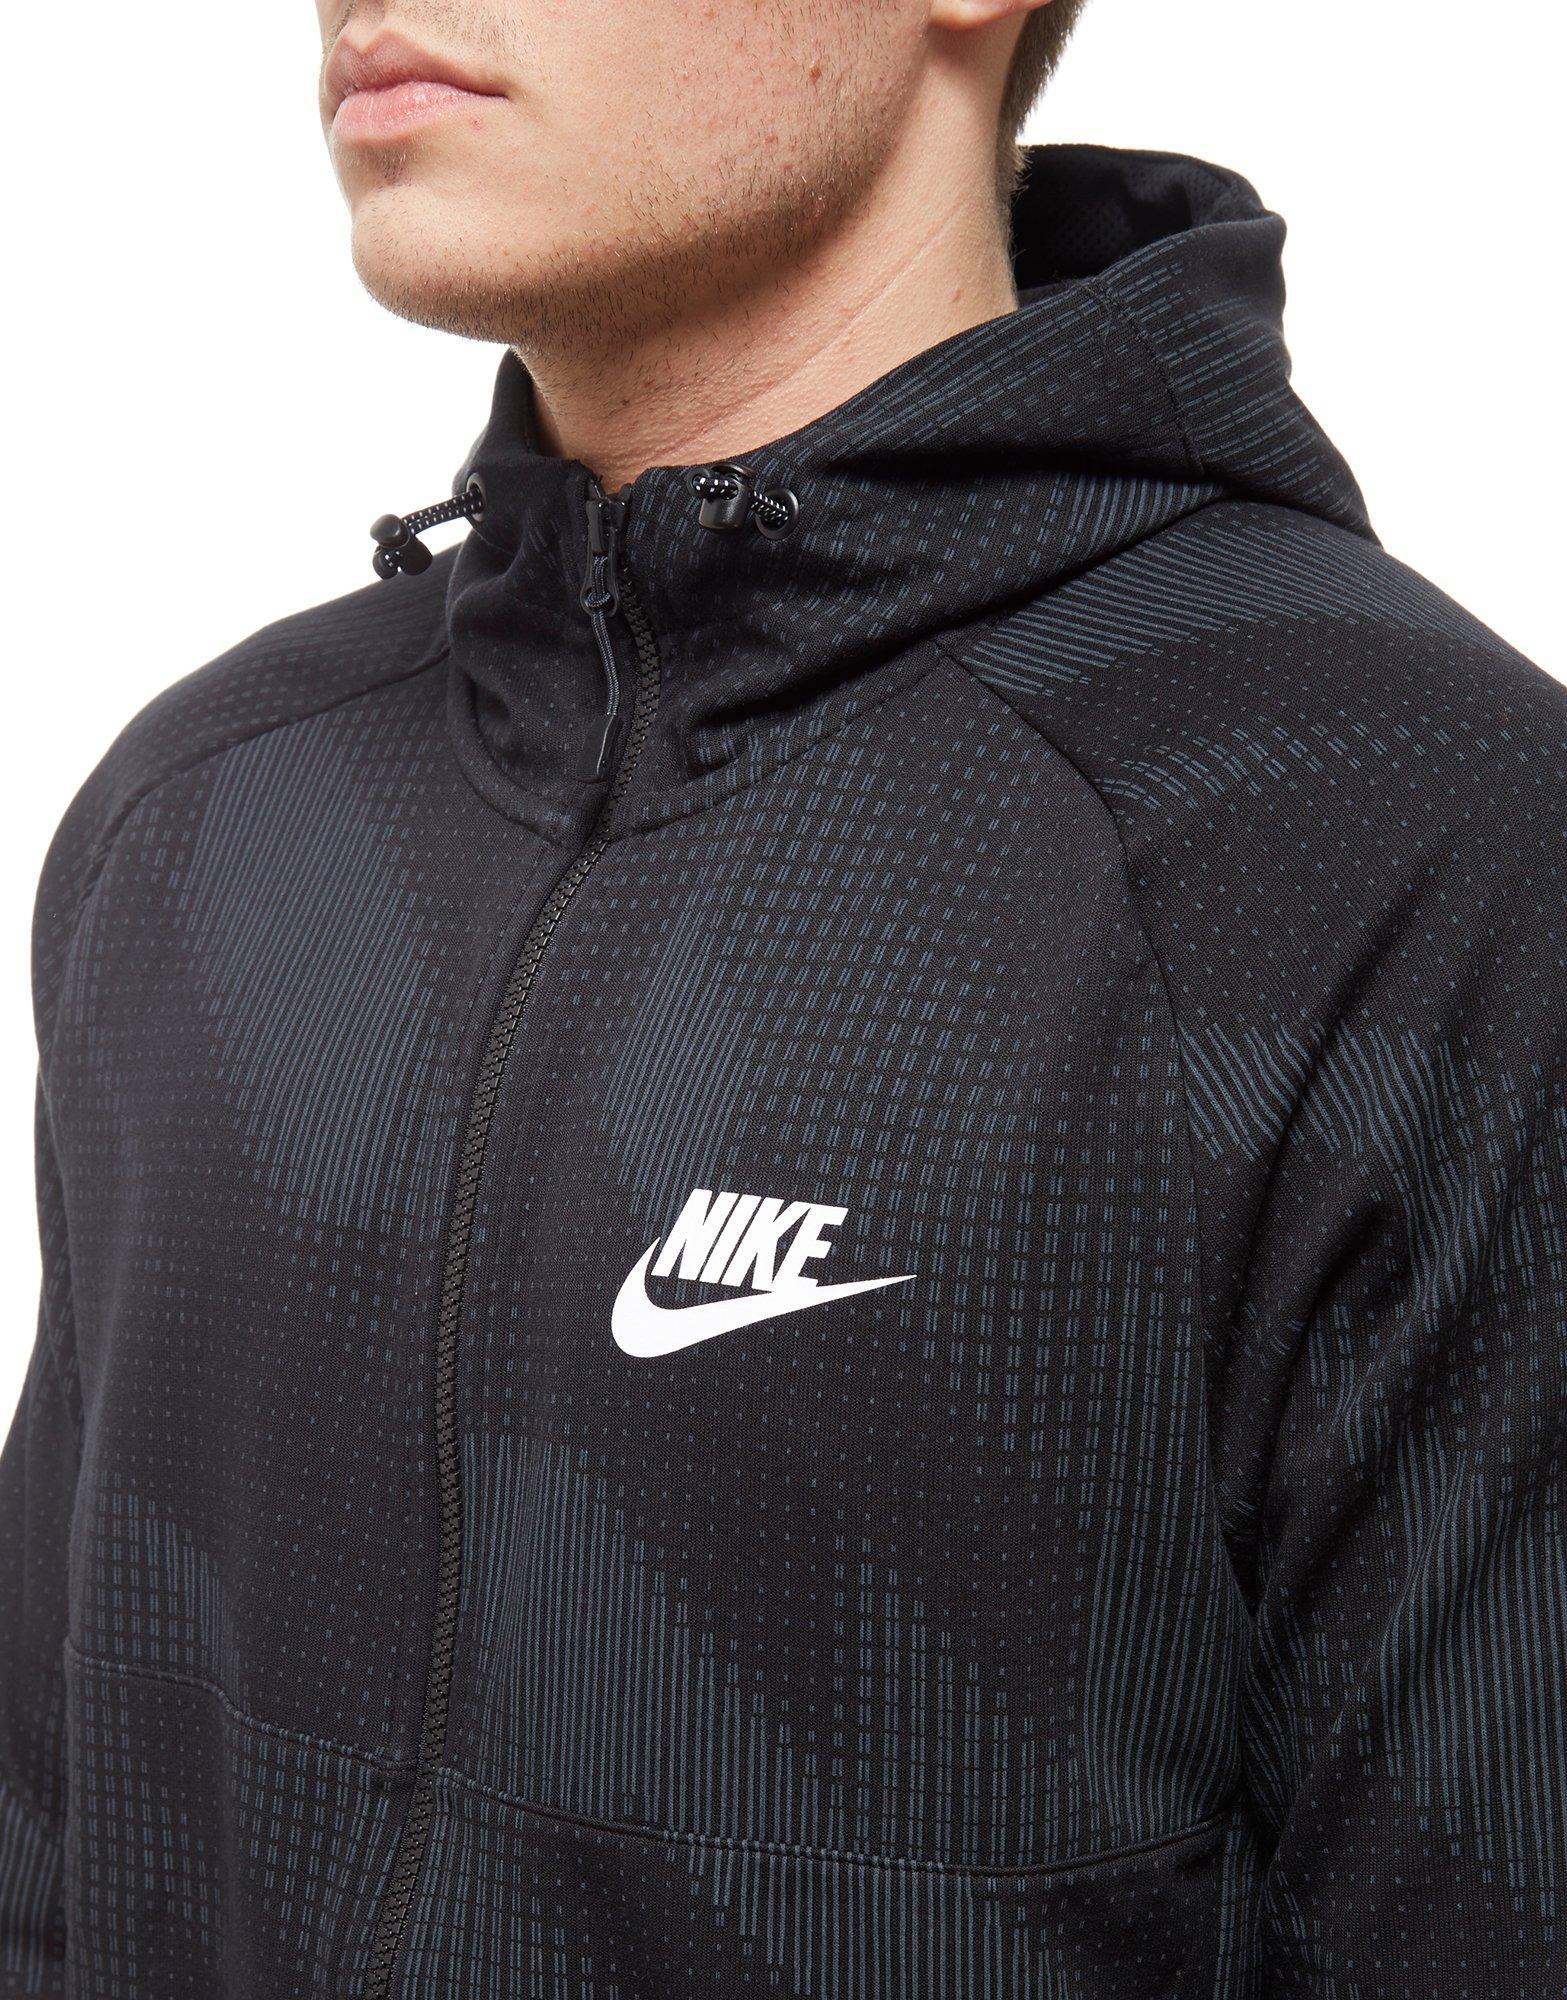 Nike Cotton Advance All Over Print Full Zip Hoodie in Black for Men - Lyst